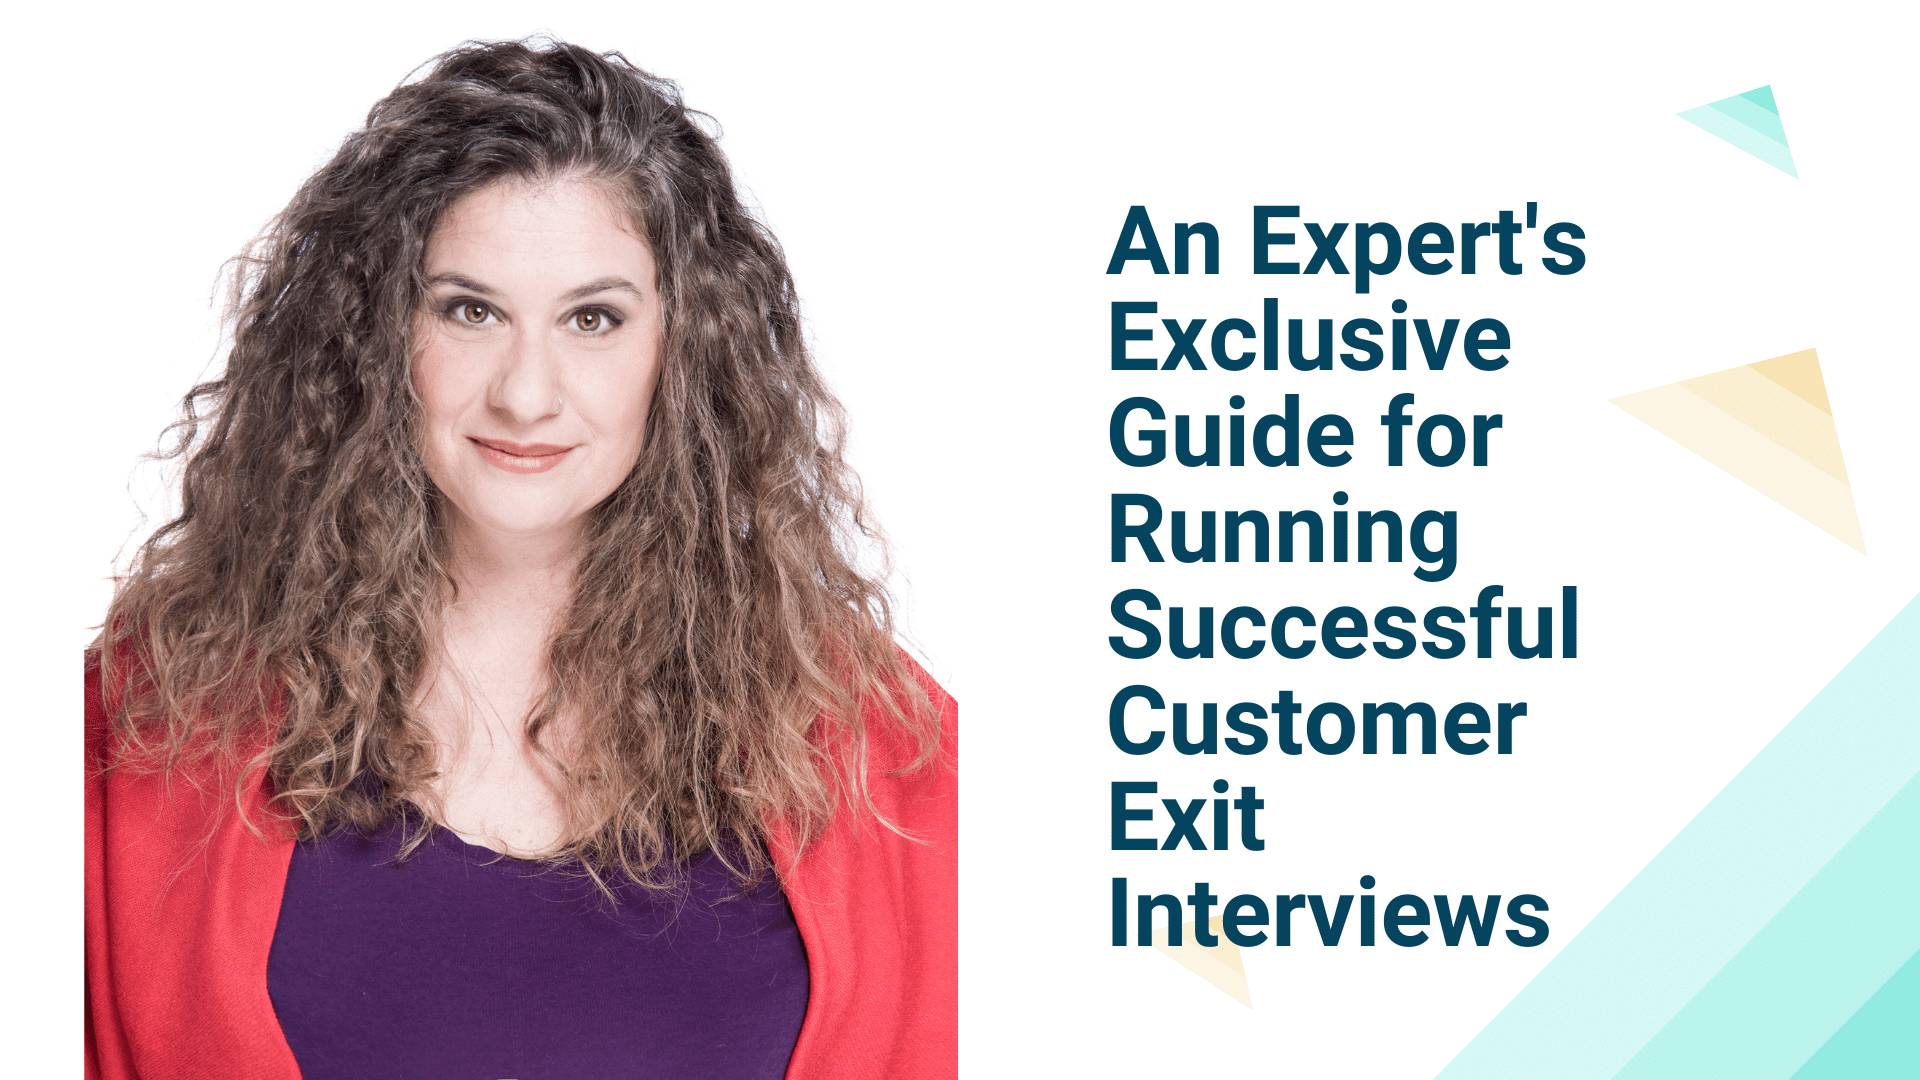 An Expert's Exclusive Guide for Running Successful Customer Exit Interviews